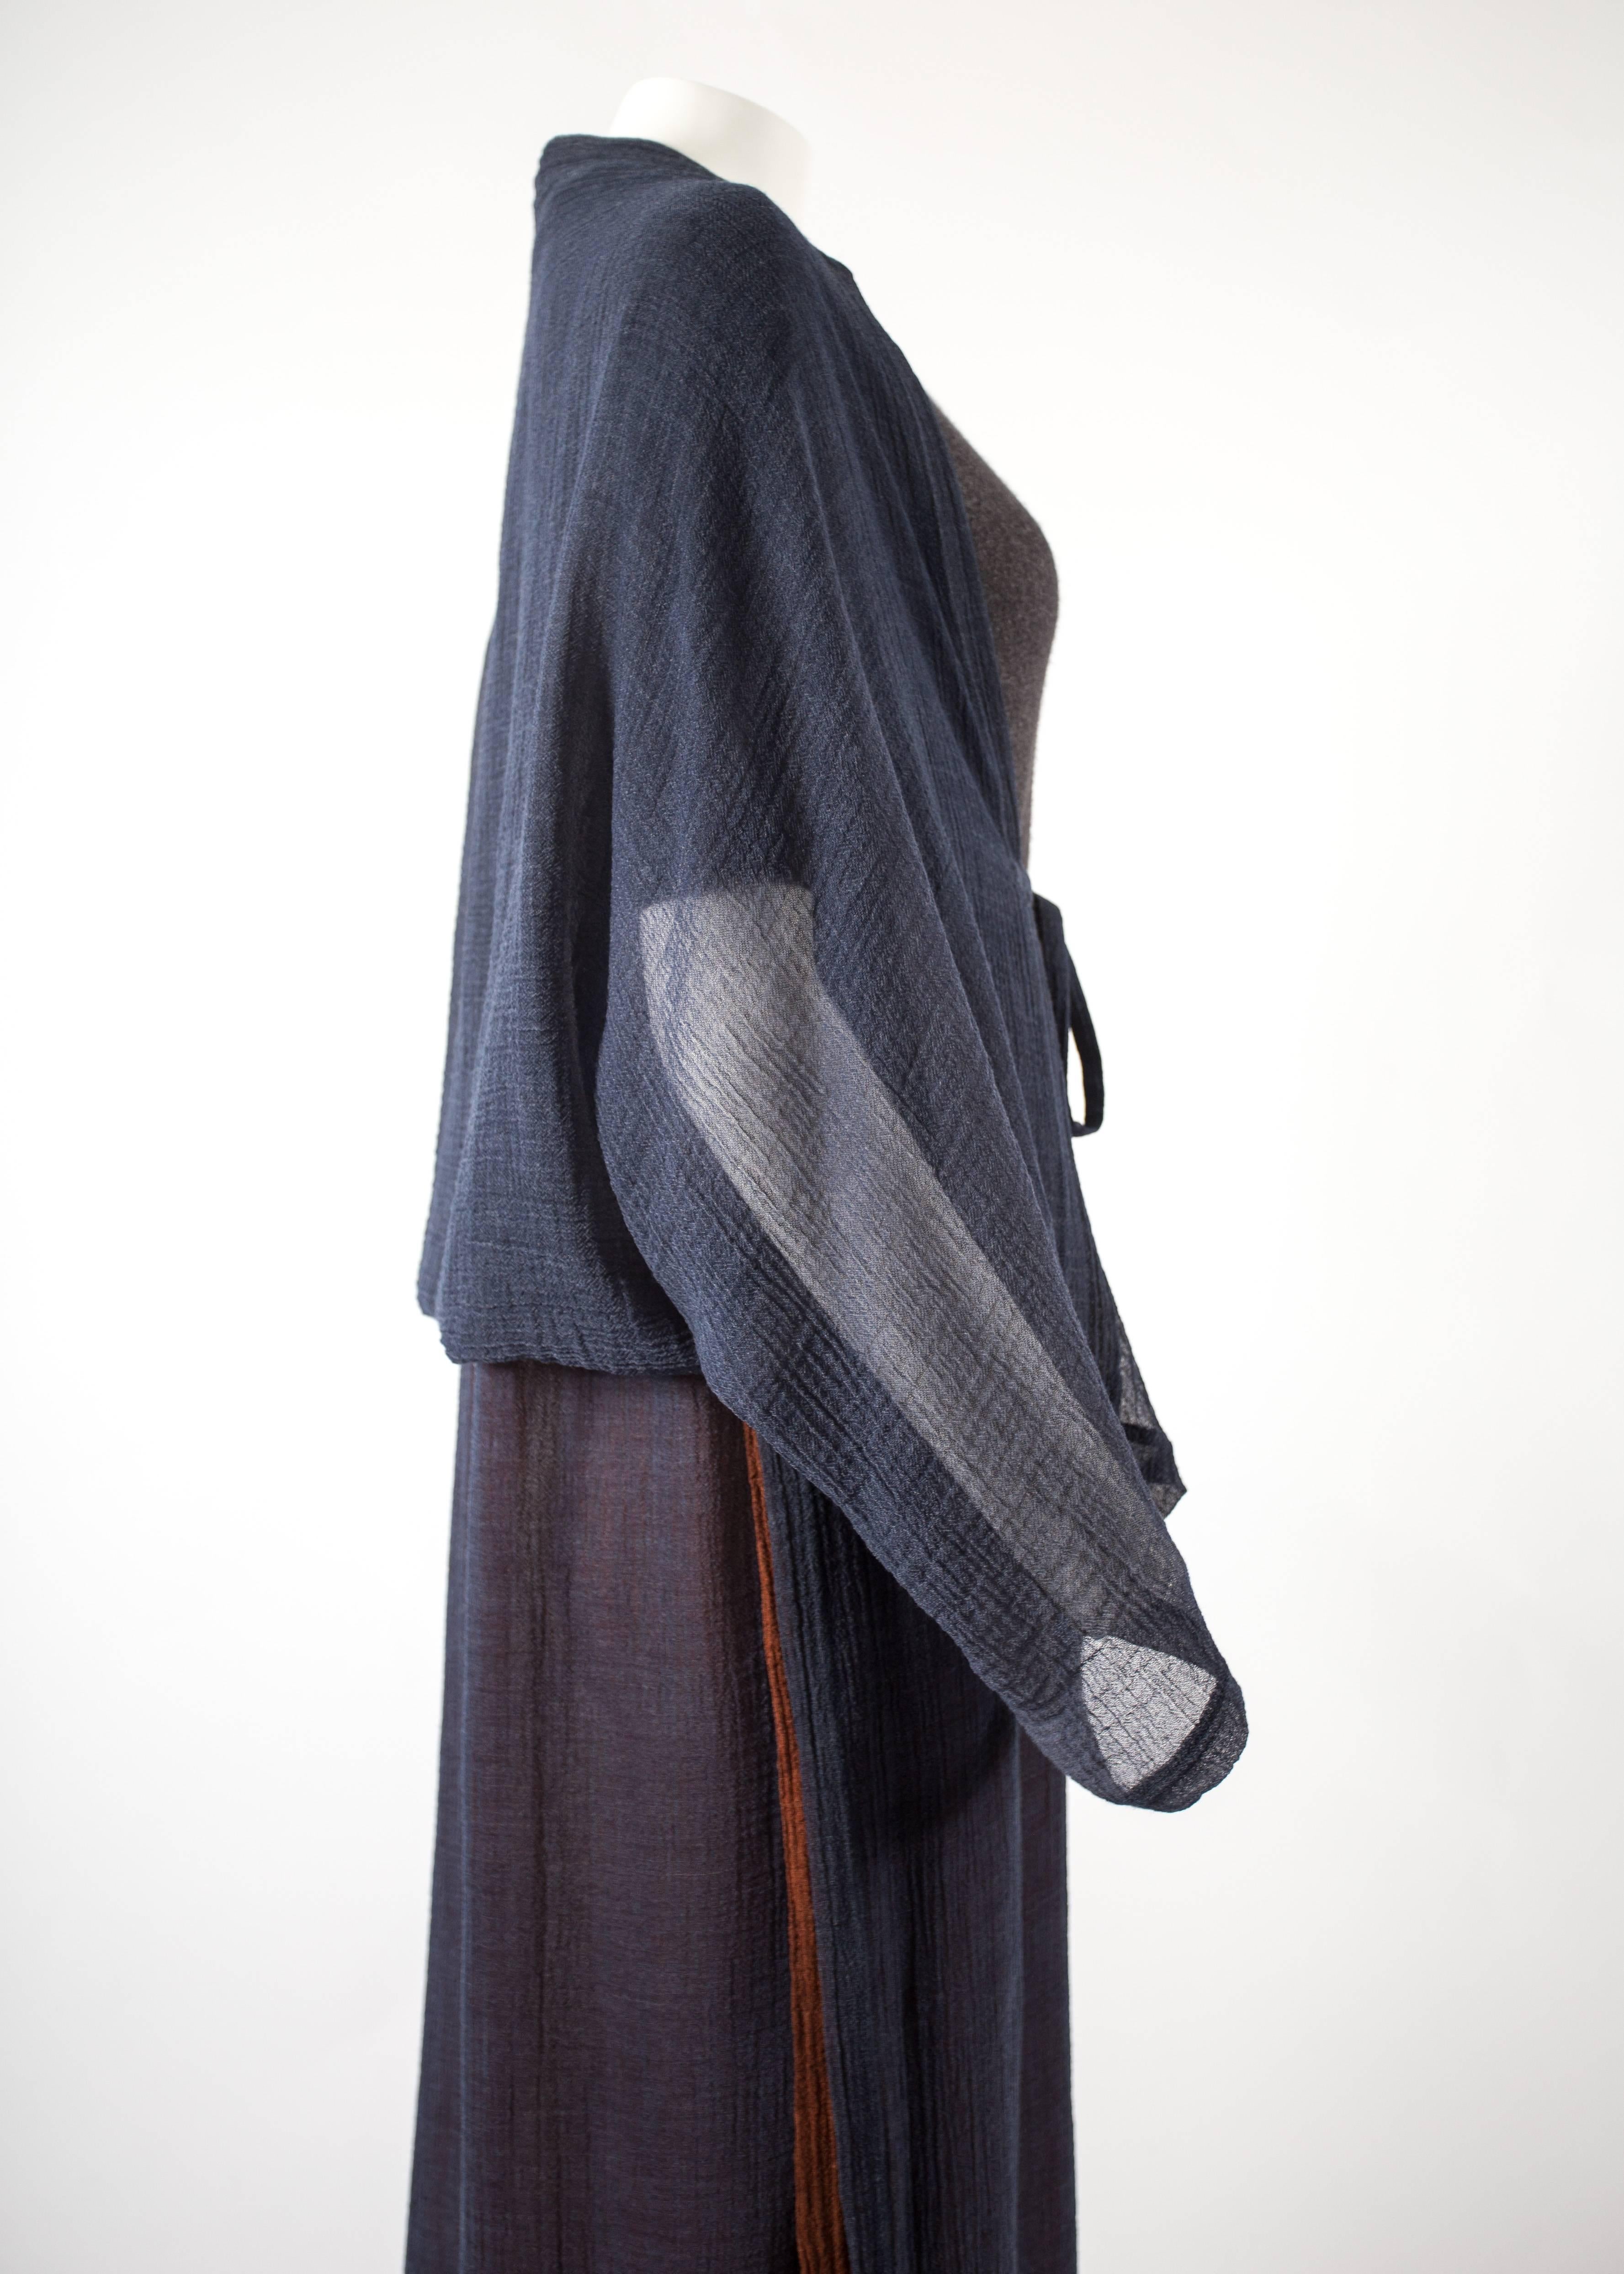 Issey Miayke tricolour layered t-shirt dress with integrated cardigan, c. 1990s For Sale 1